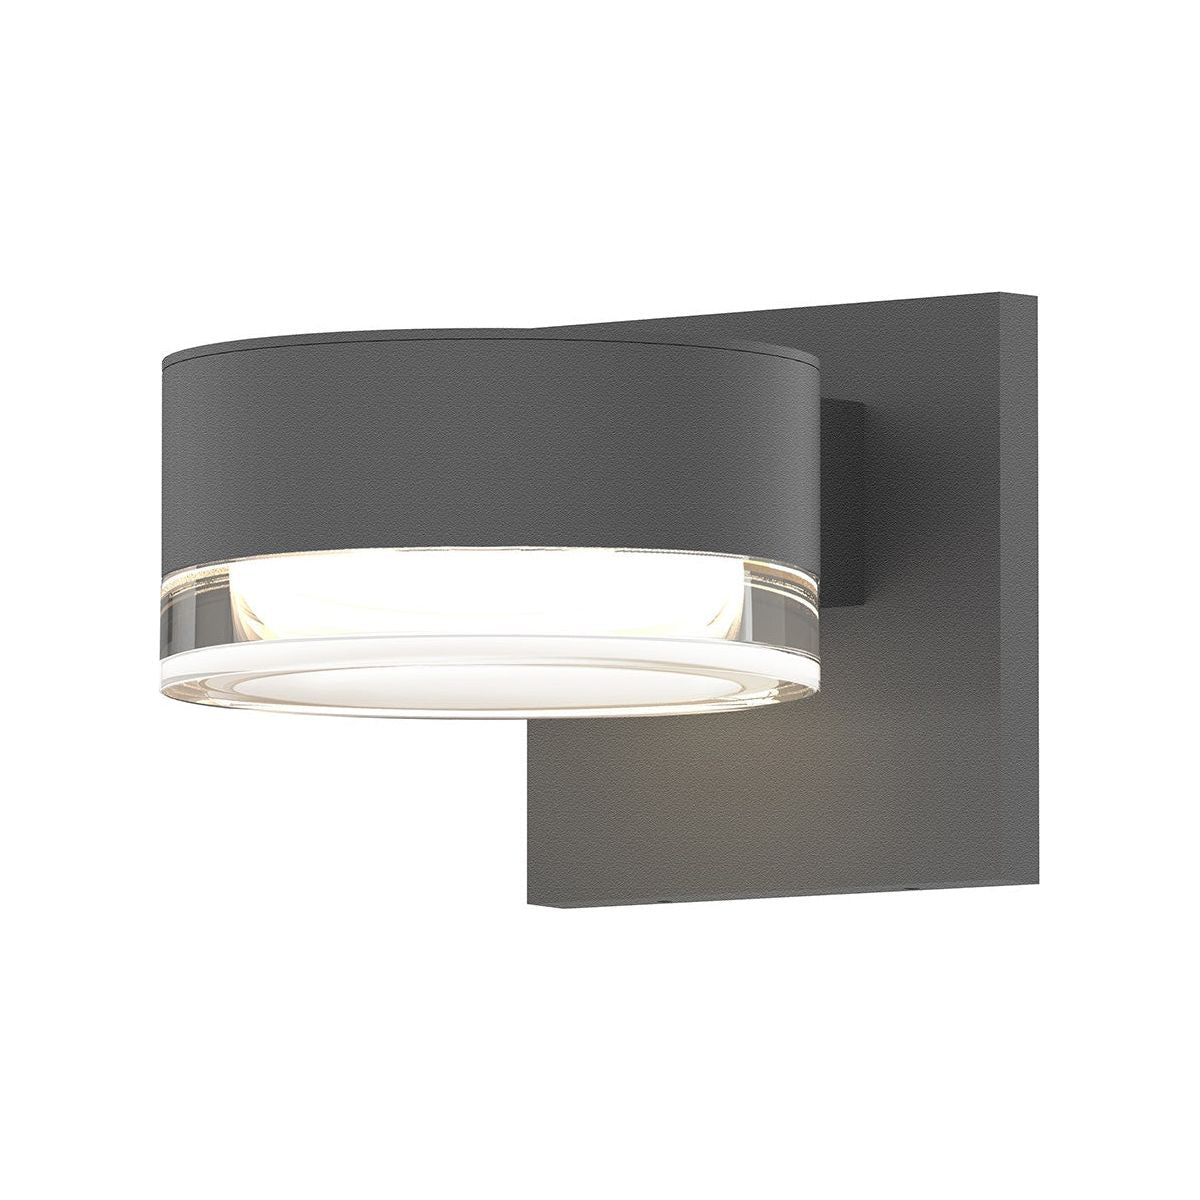 REALS Downlight LED Sconce with Plate Cap and Cylinder Lens